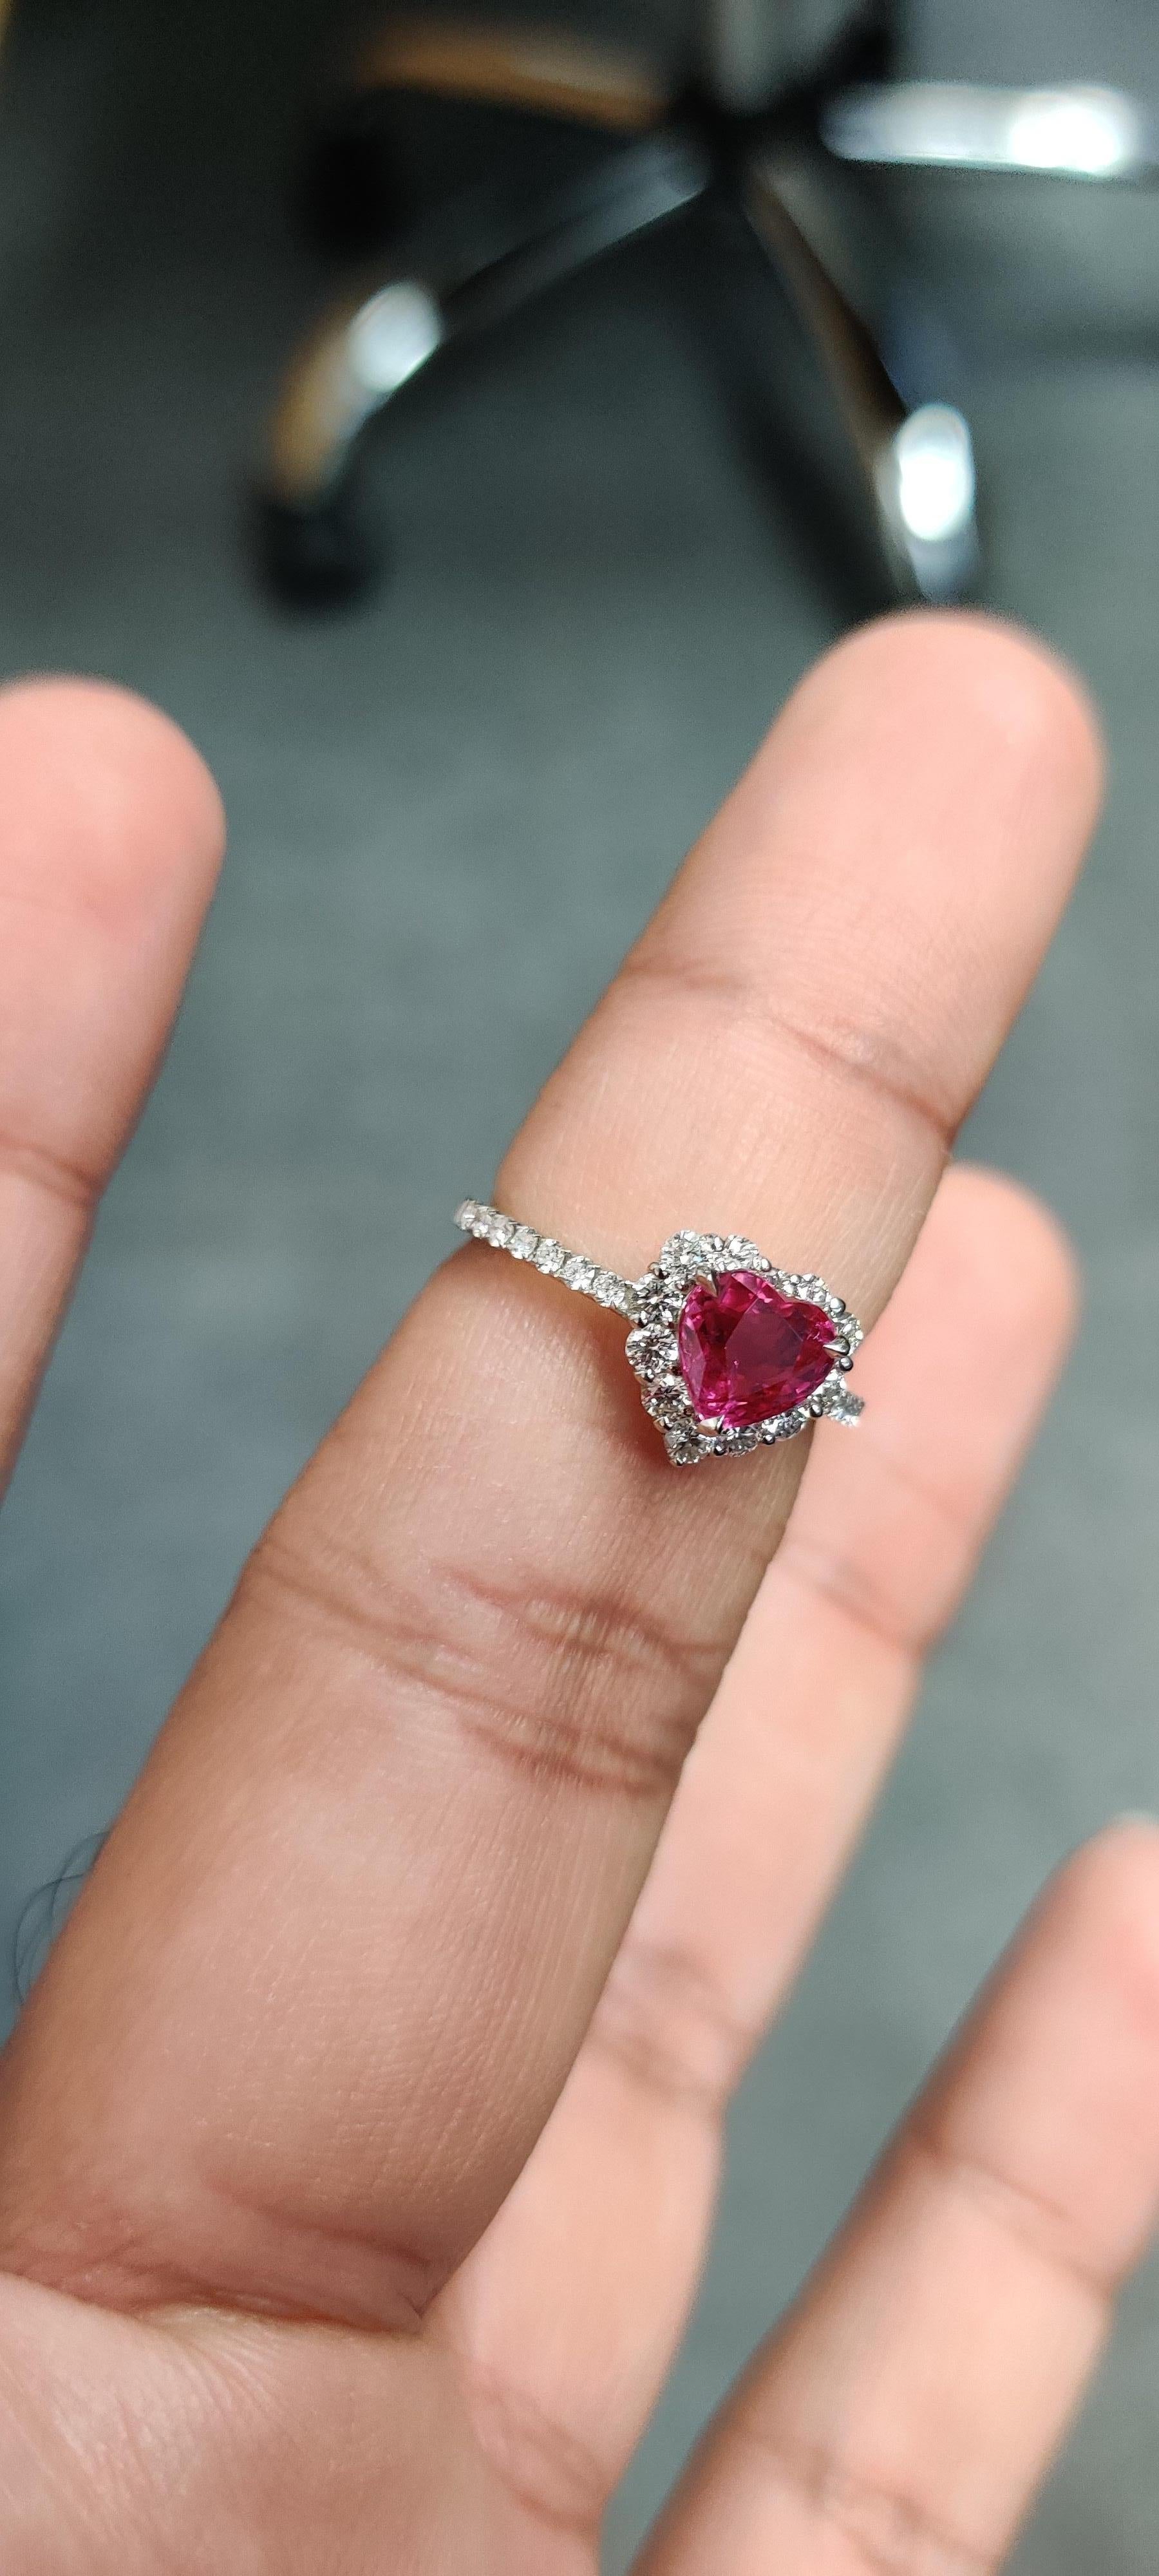 Heart Cut 1.23 Carat Heart Shaped Ruby Ring in Platinum 900 For Sale